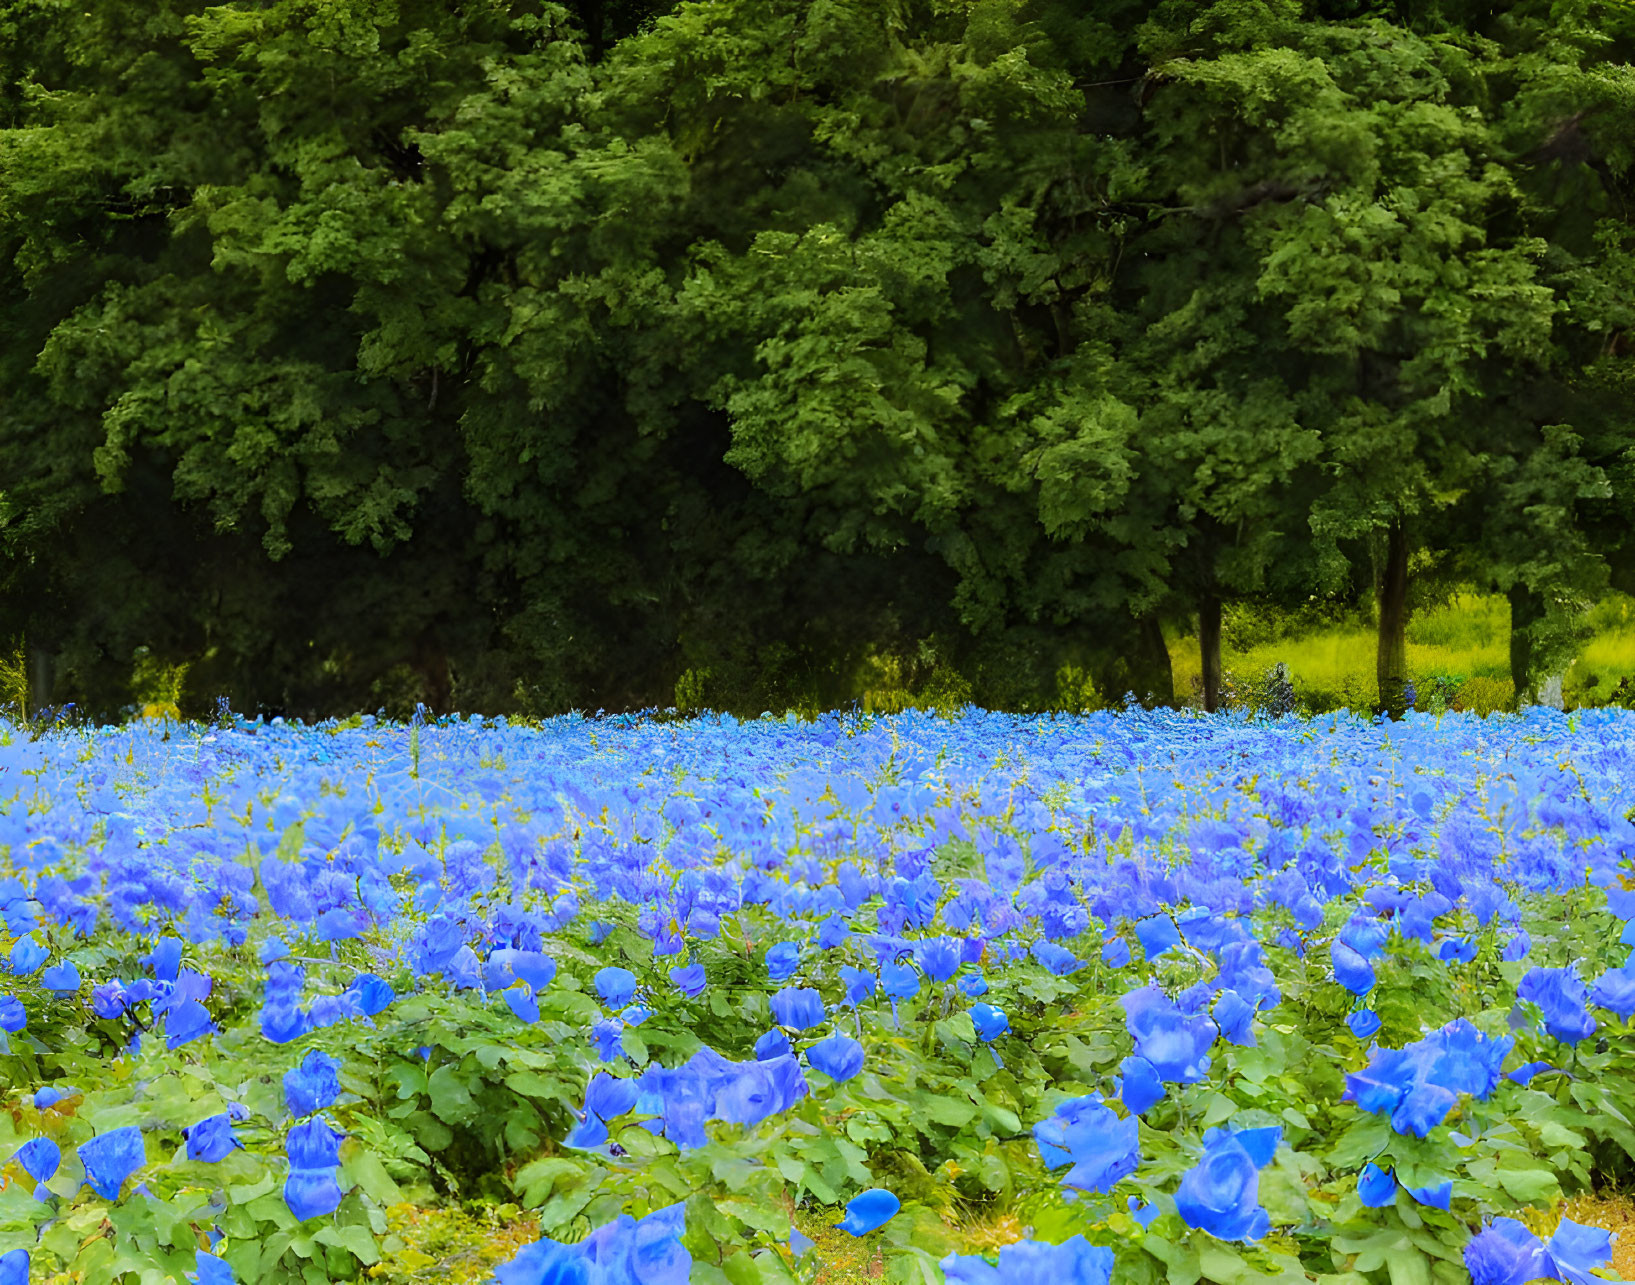 Field of blue roses